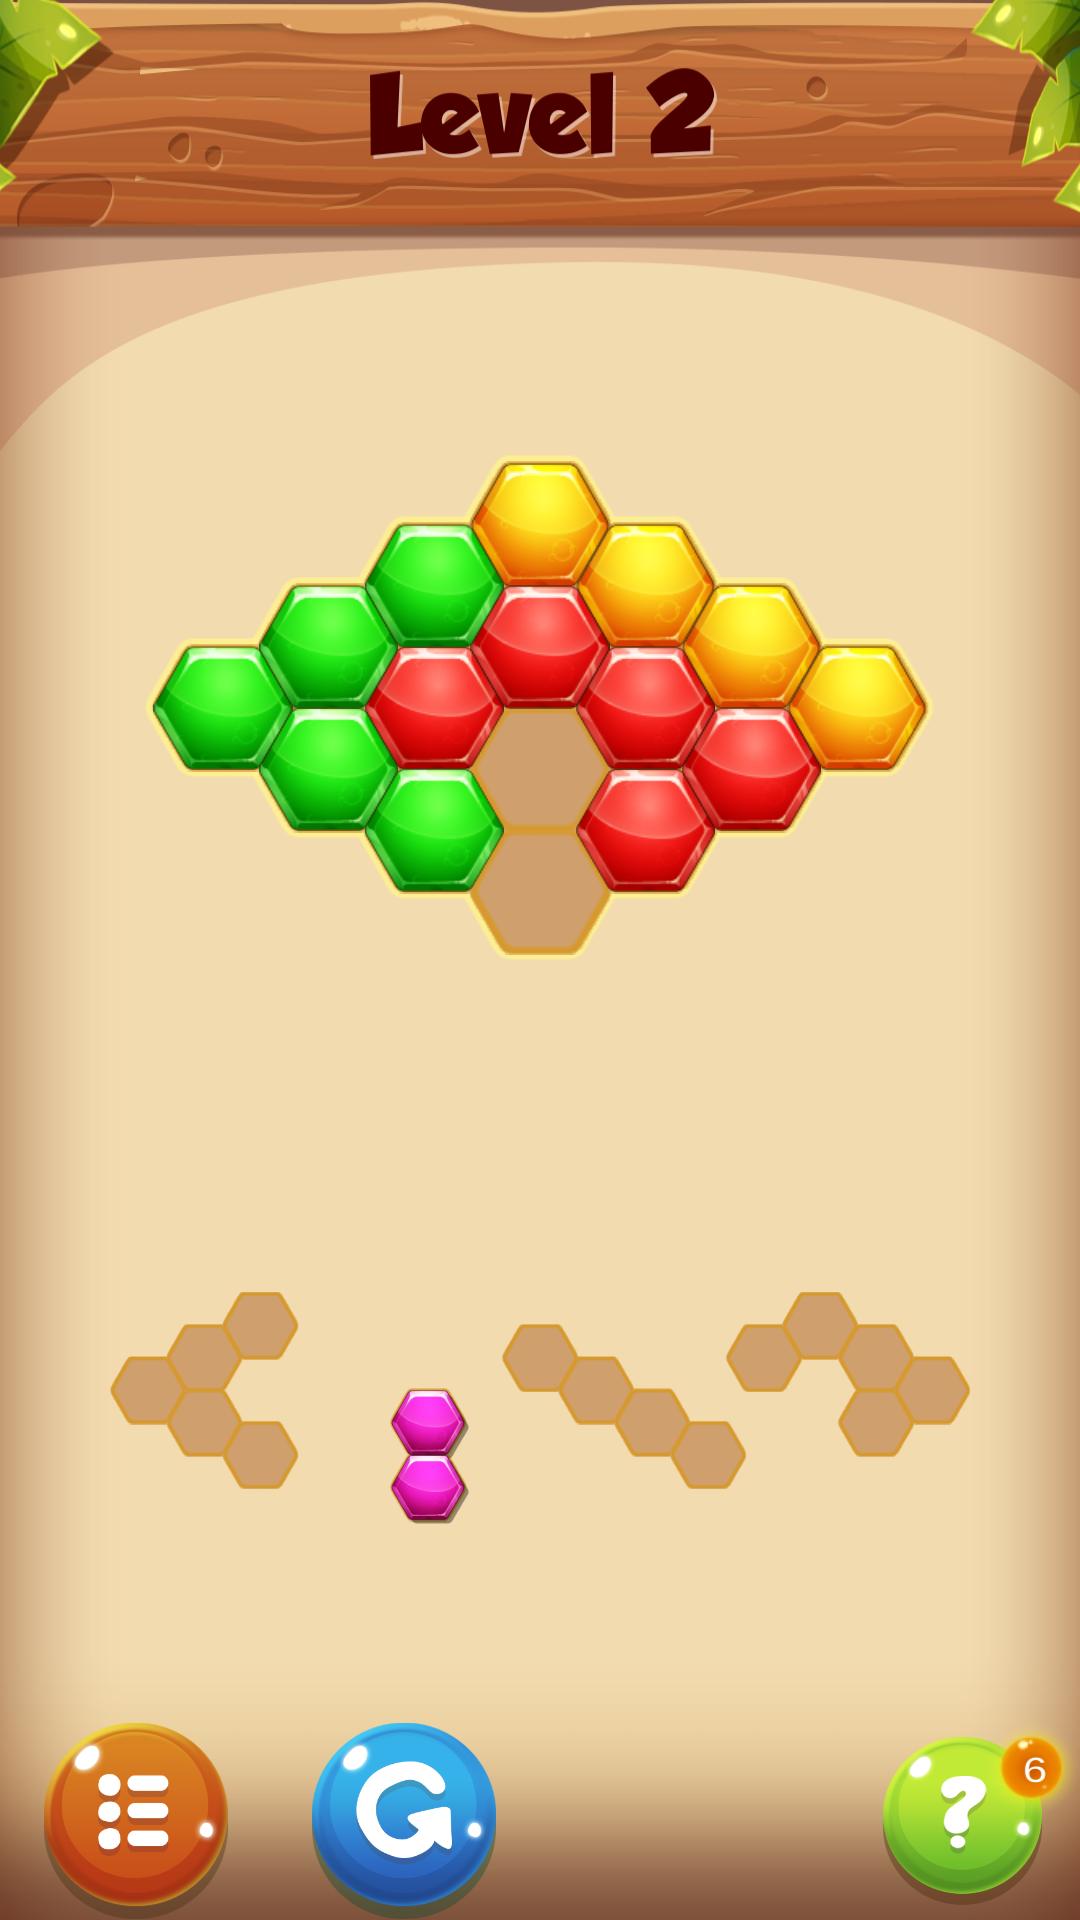 Hexa Puzzle for Android - APK Download